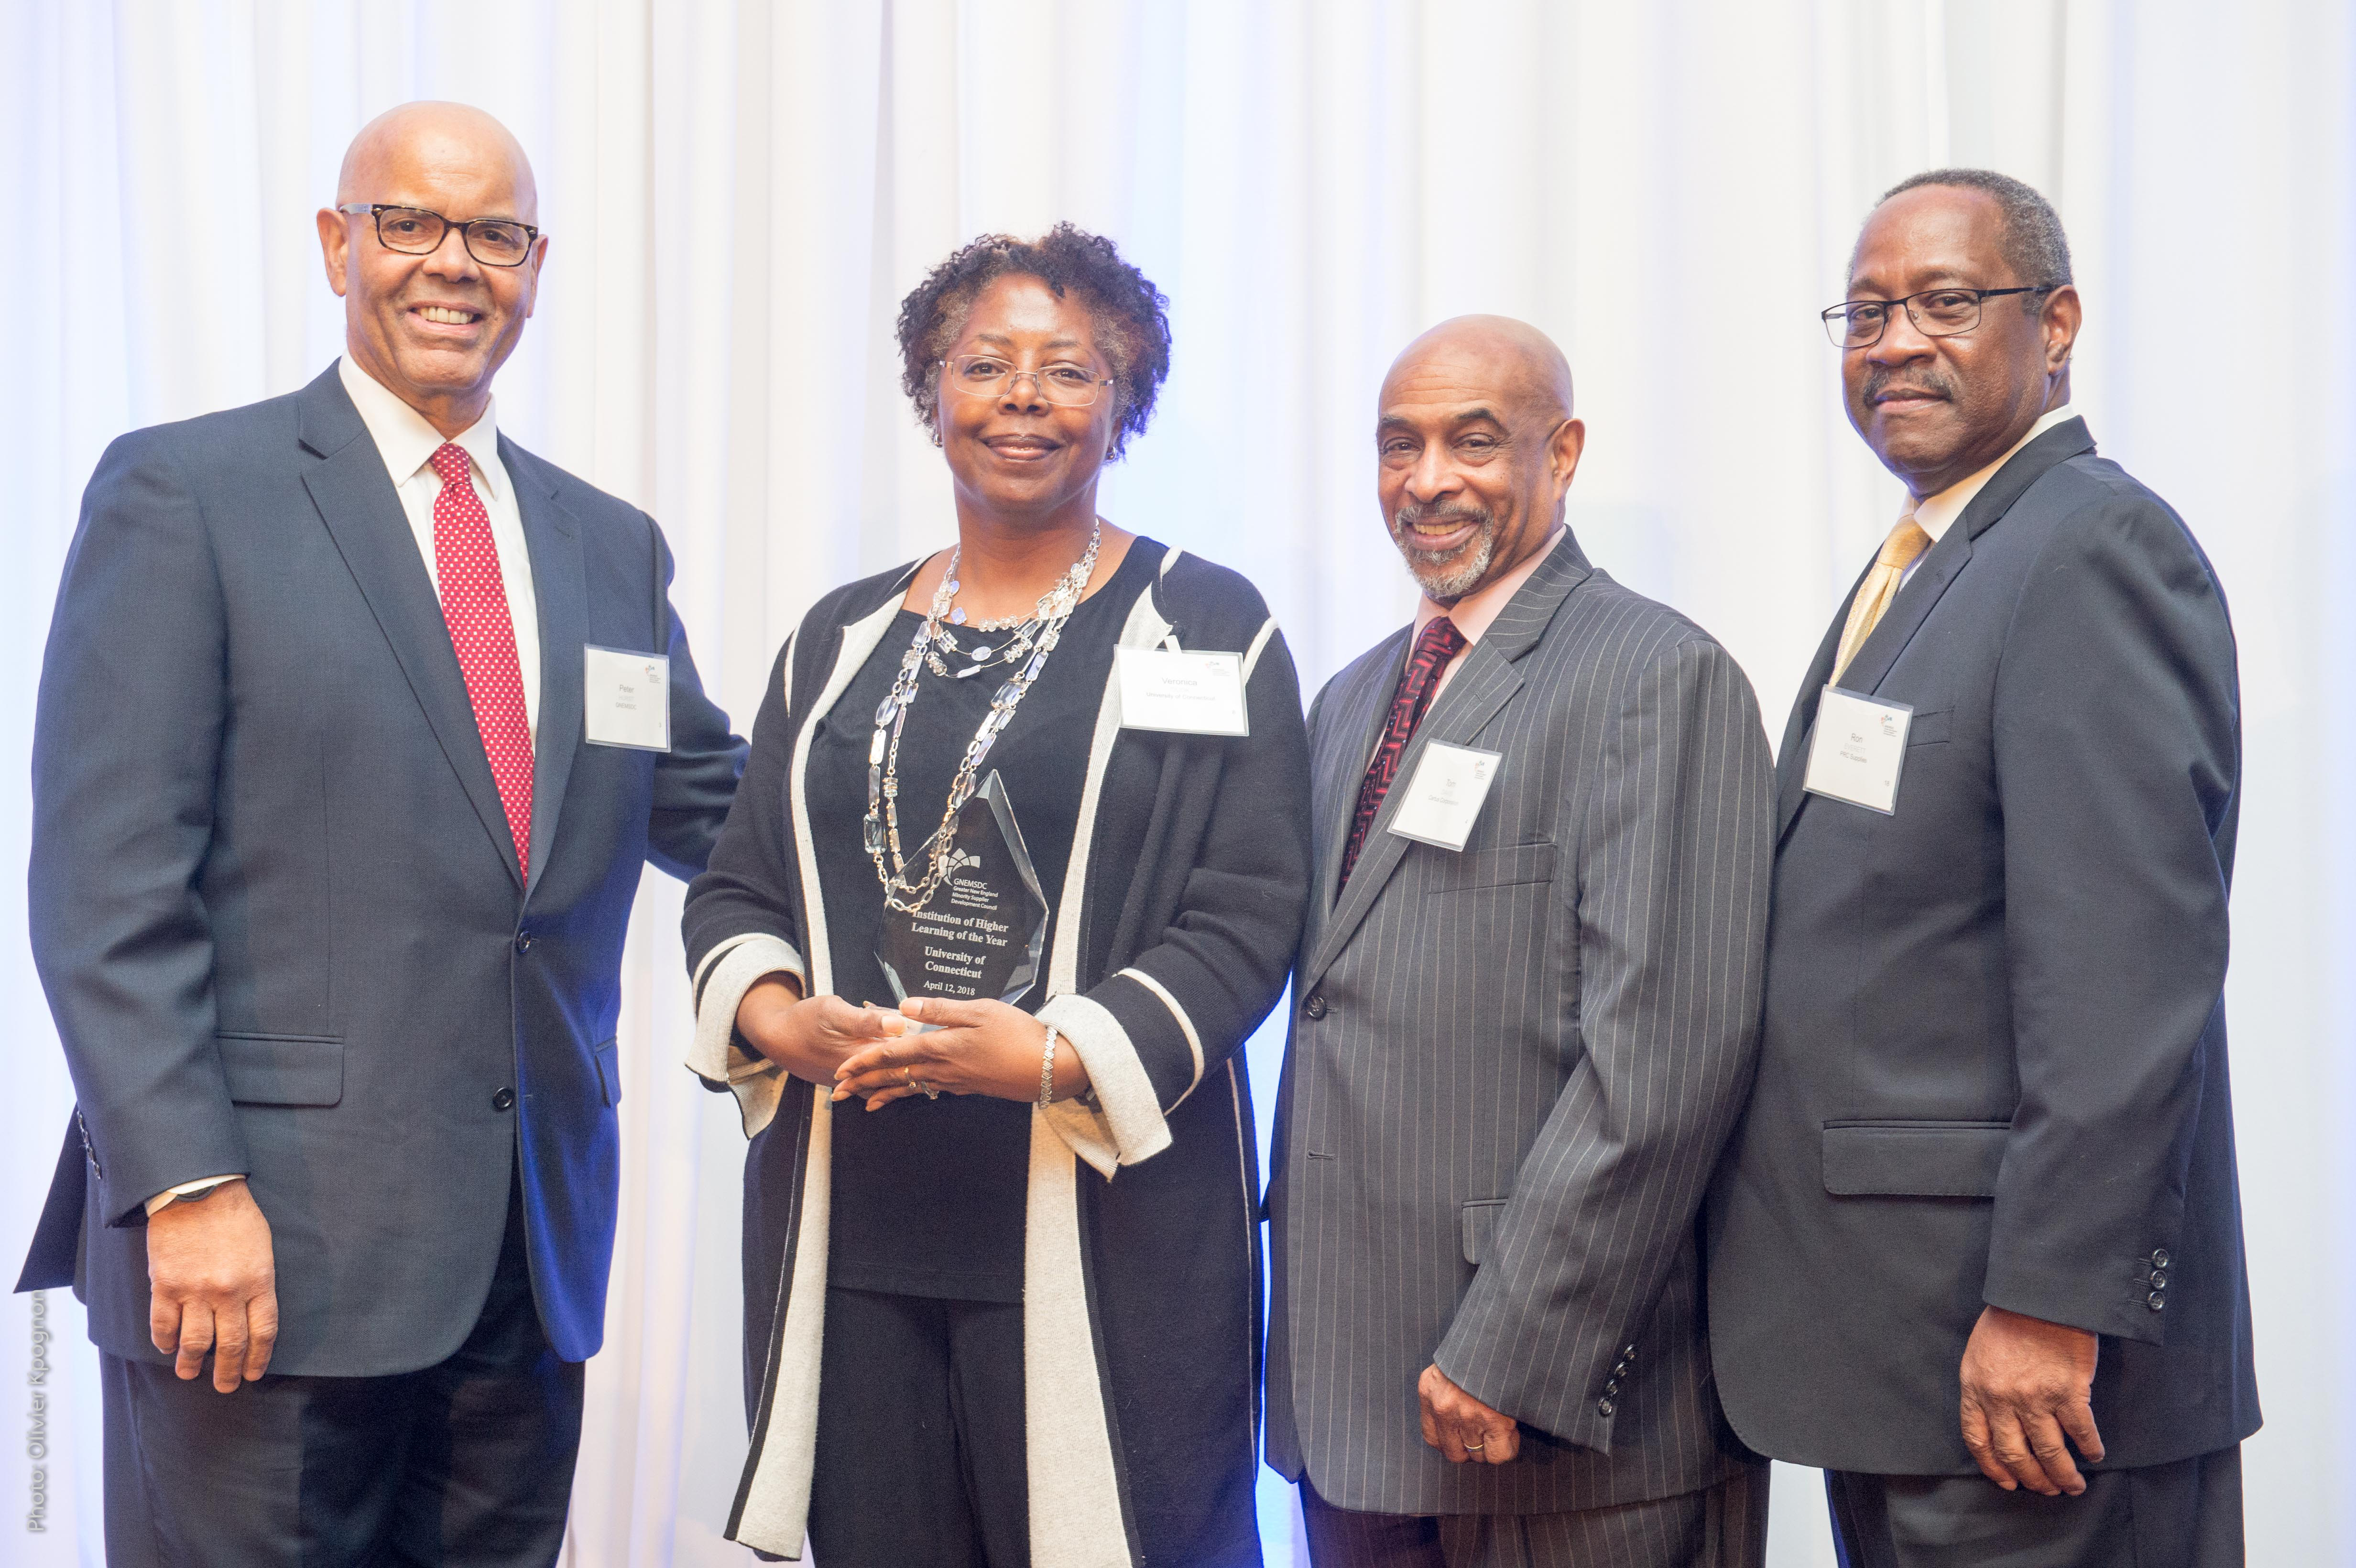 Veronica Cook, program director for the UConn Supplier Diversity Program, second from left, with from left, Peter F. Hurst Jr., President & CEO of GNEMSDC; T. Tom Davis, Chairman, GNEMSDC Board of Directors; and Ron Everett, GNEMSDC Board of Directors. (Olivier Kpognon Photo)